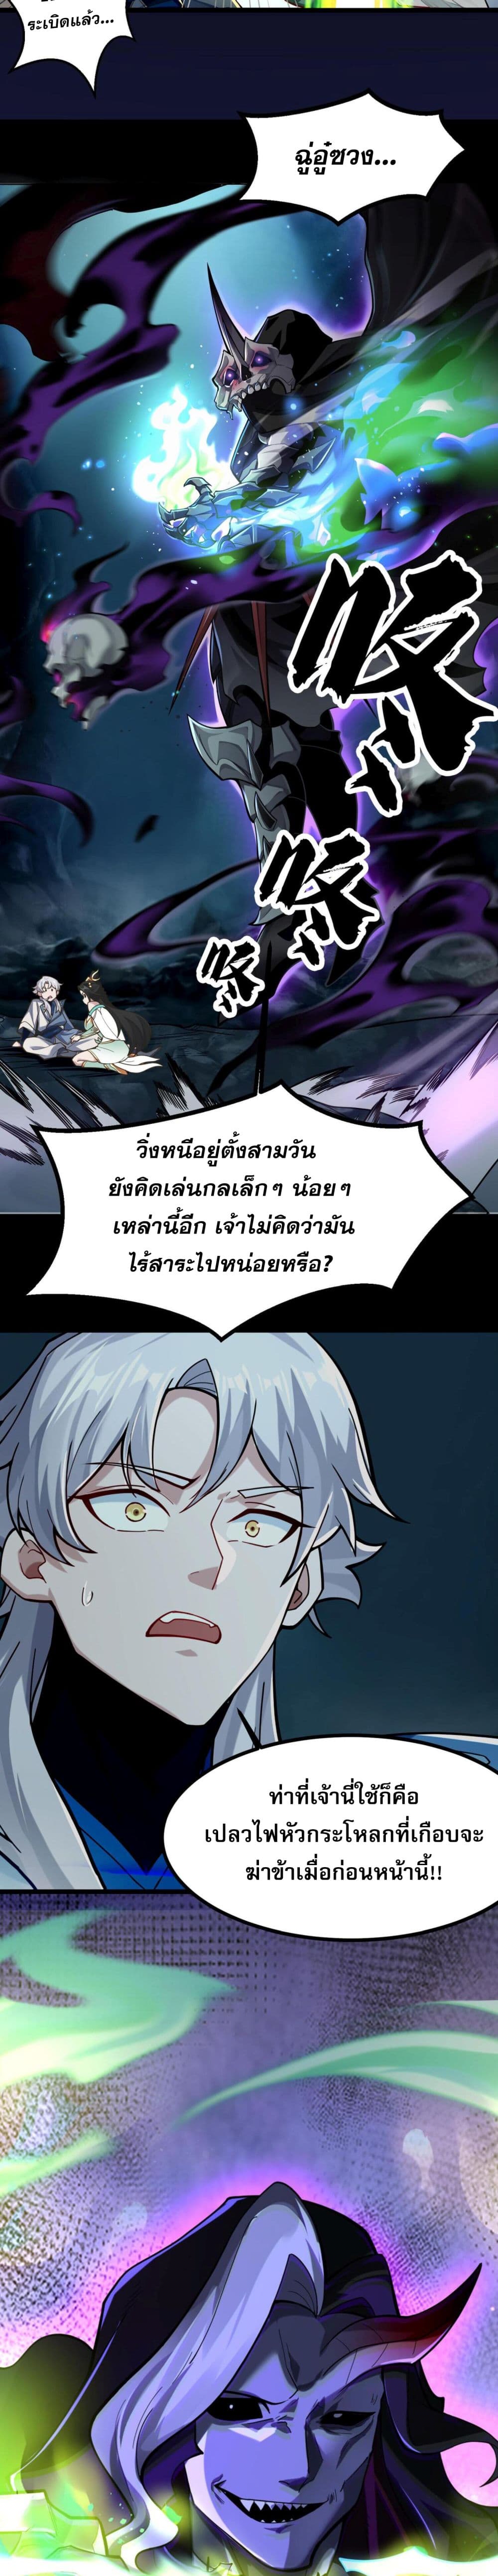 I Have Hundreds of Millions of Years of Cultivation ข้ามีพลังบำเพ็ญหนึ่งล้านปี 1-1